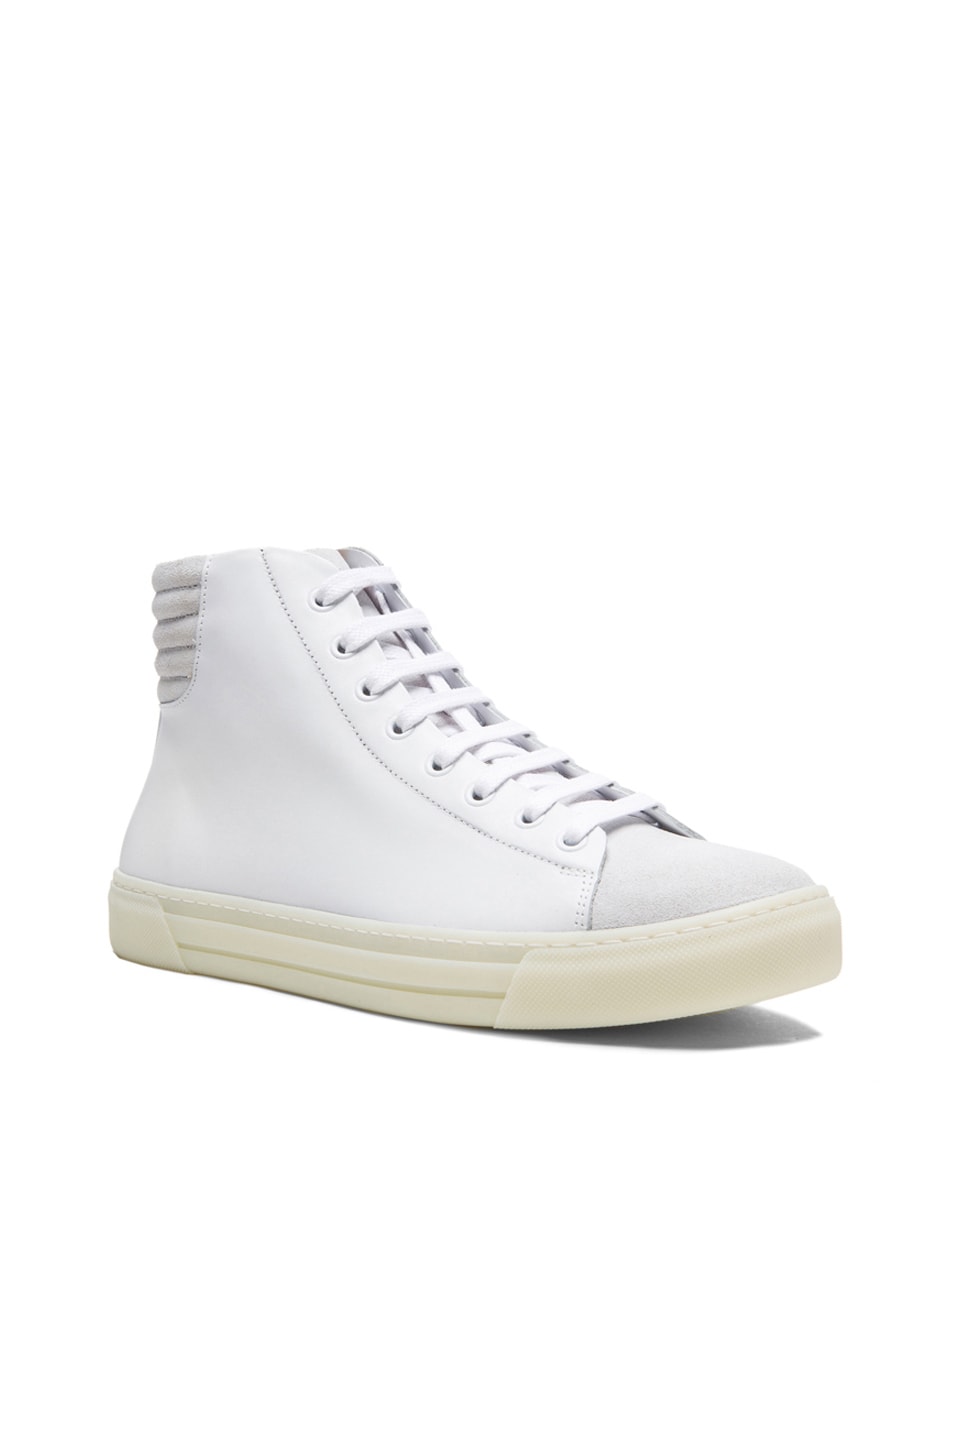 Image 1 of SILENT DAMIR DOMA Fidis High Top Leather Sneakers in Optic White